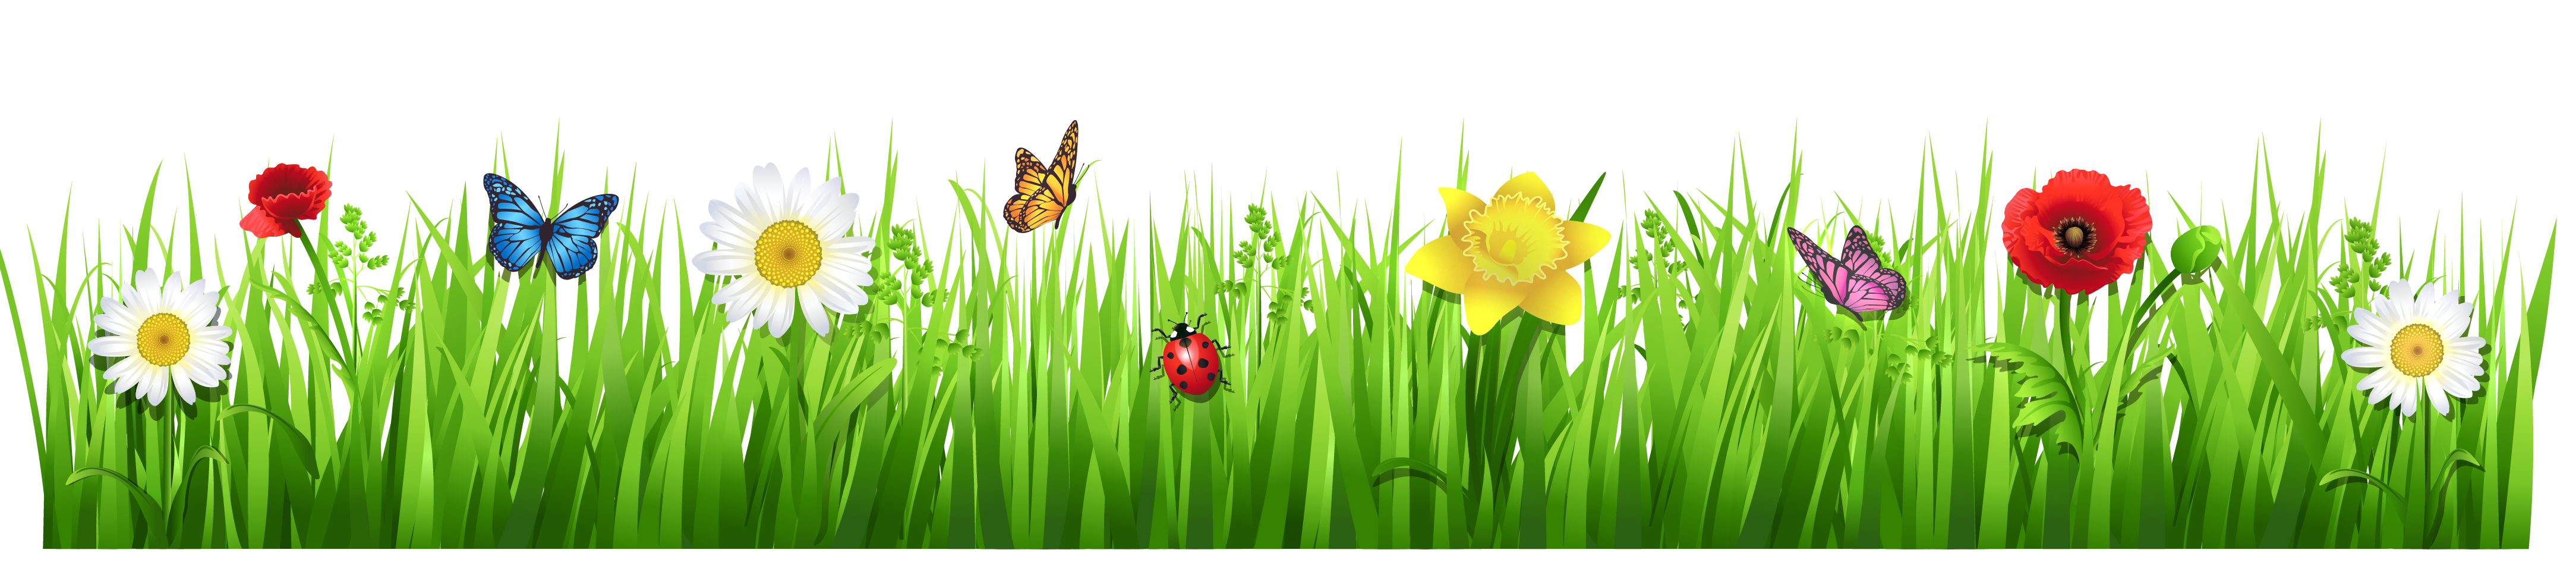 Spring grass with flowers clipart picture 0